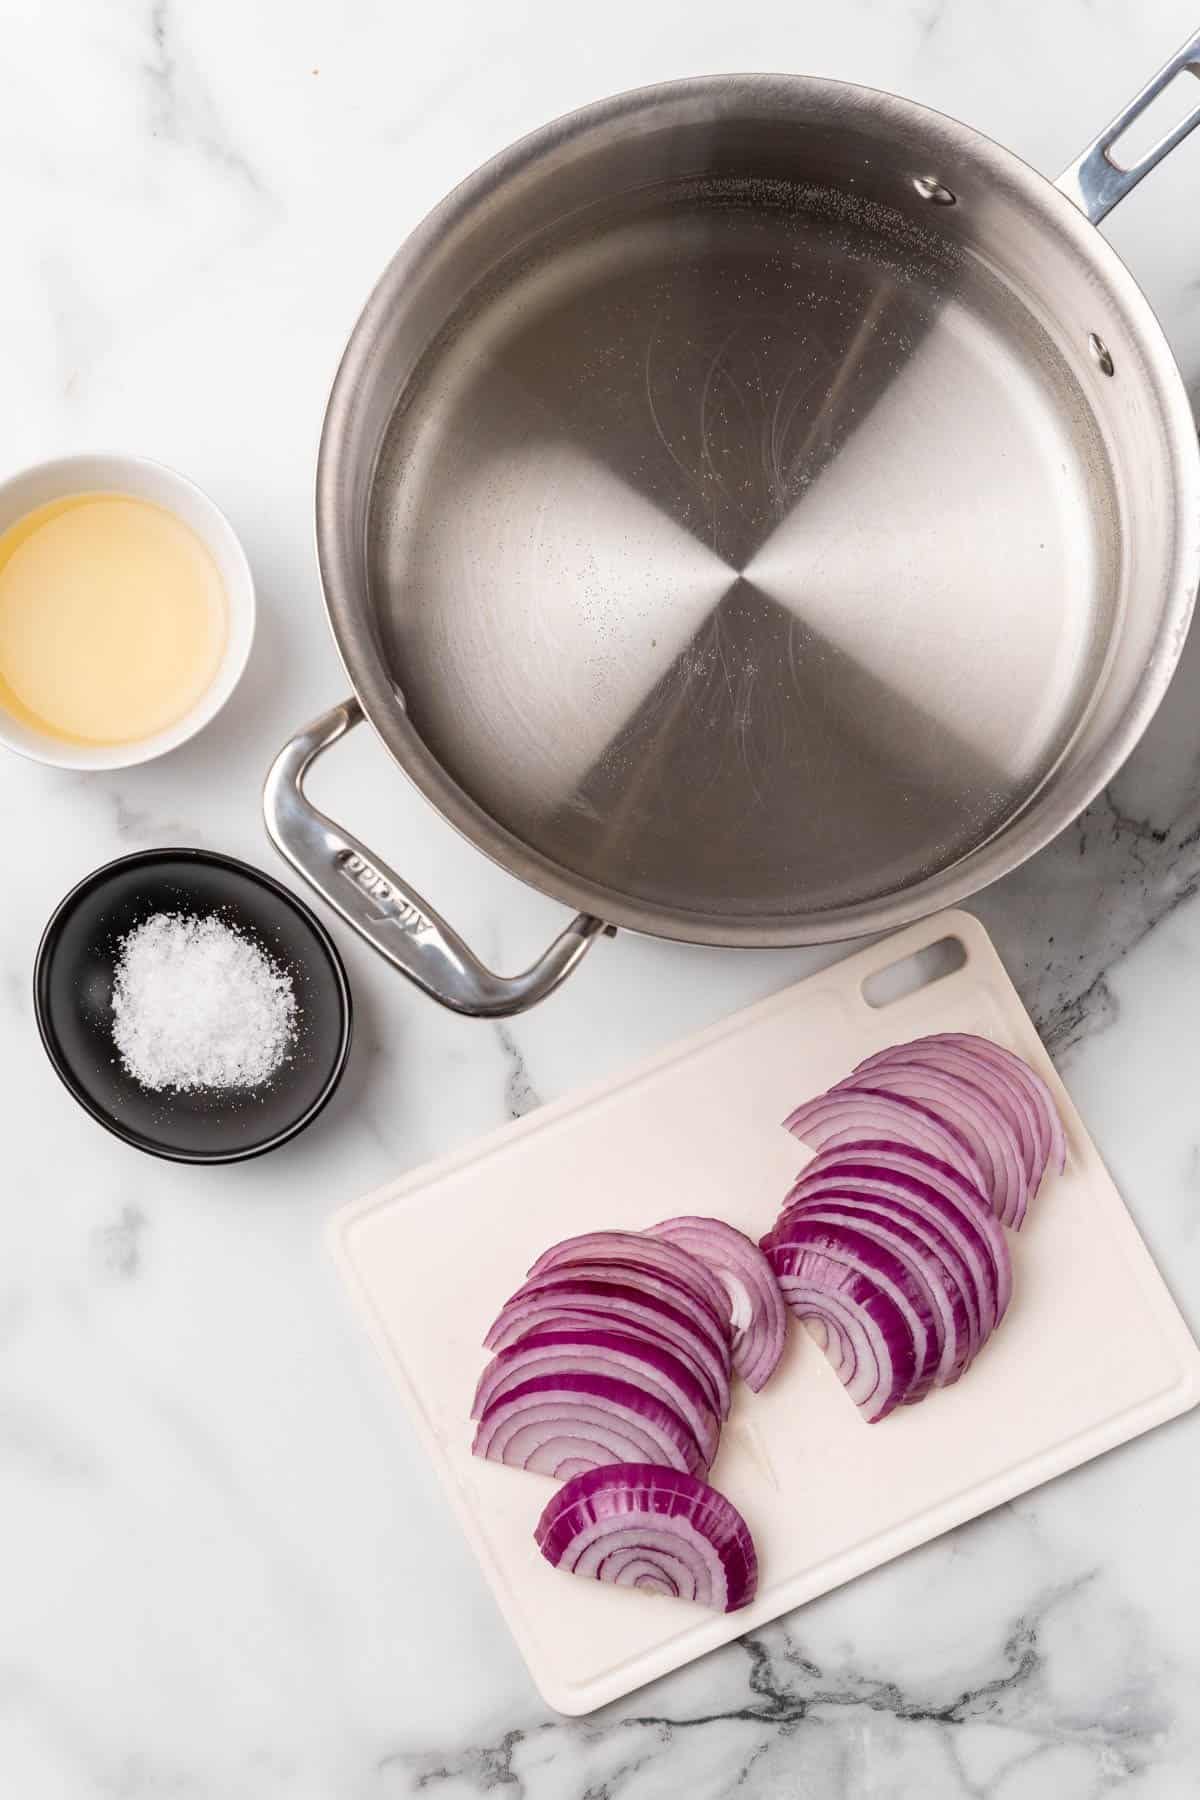 Overhead view of a large metal pot, vinegar in a white ramekin, salt in a black ramekin, and red onion cut into slices on a white cutting board; all seen from above on a white marble surface